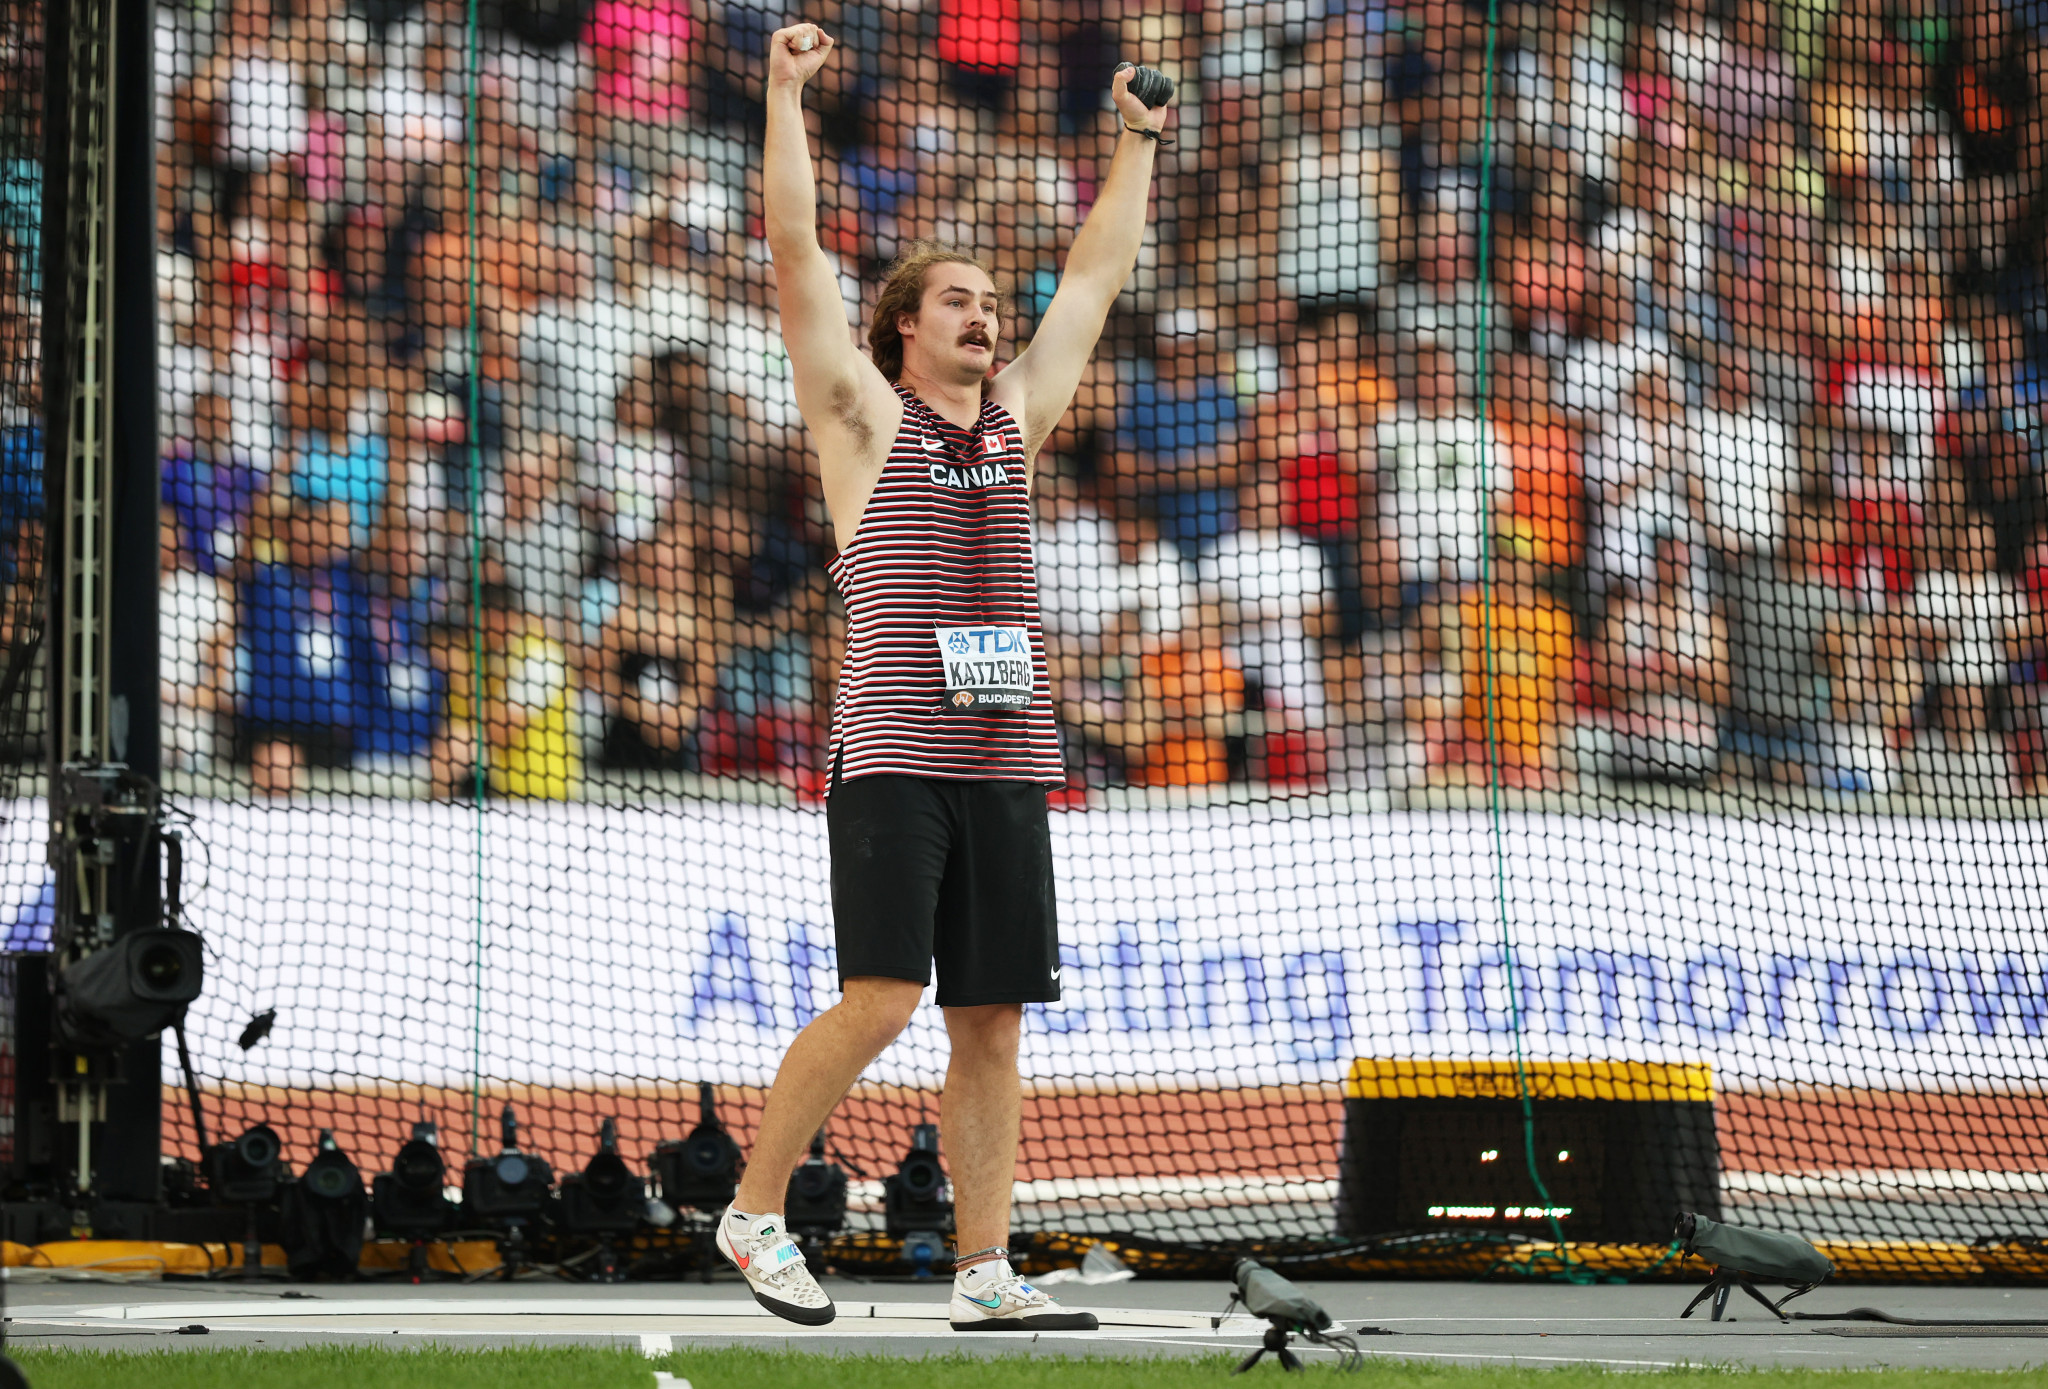 Ethan Katzberg of Canada produced an 81.25 metres throw in the men's hammer throw final to win gold in Budapest ©Getty Images